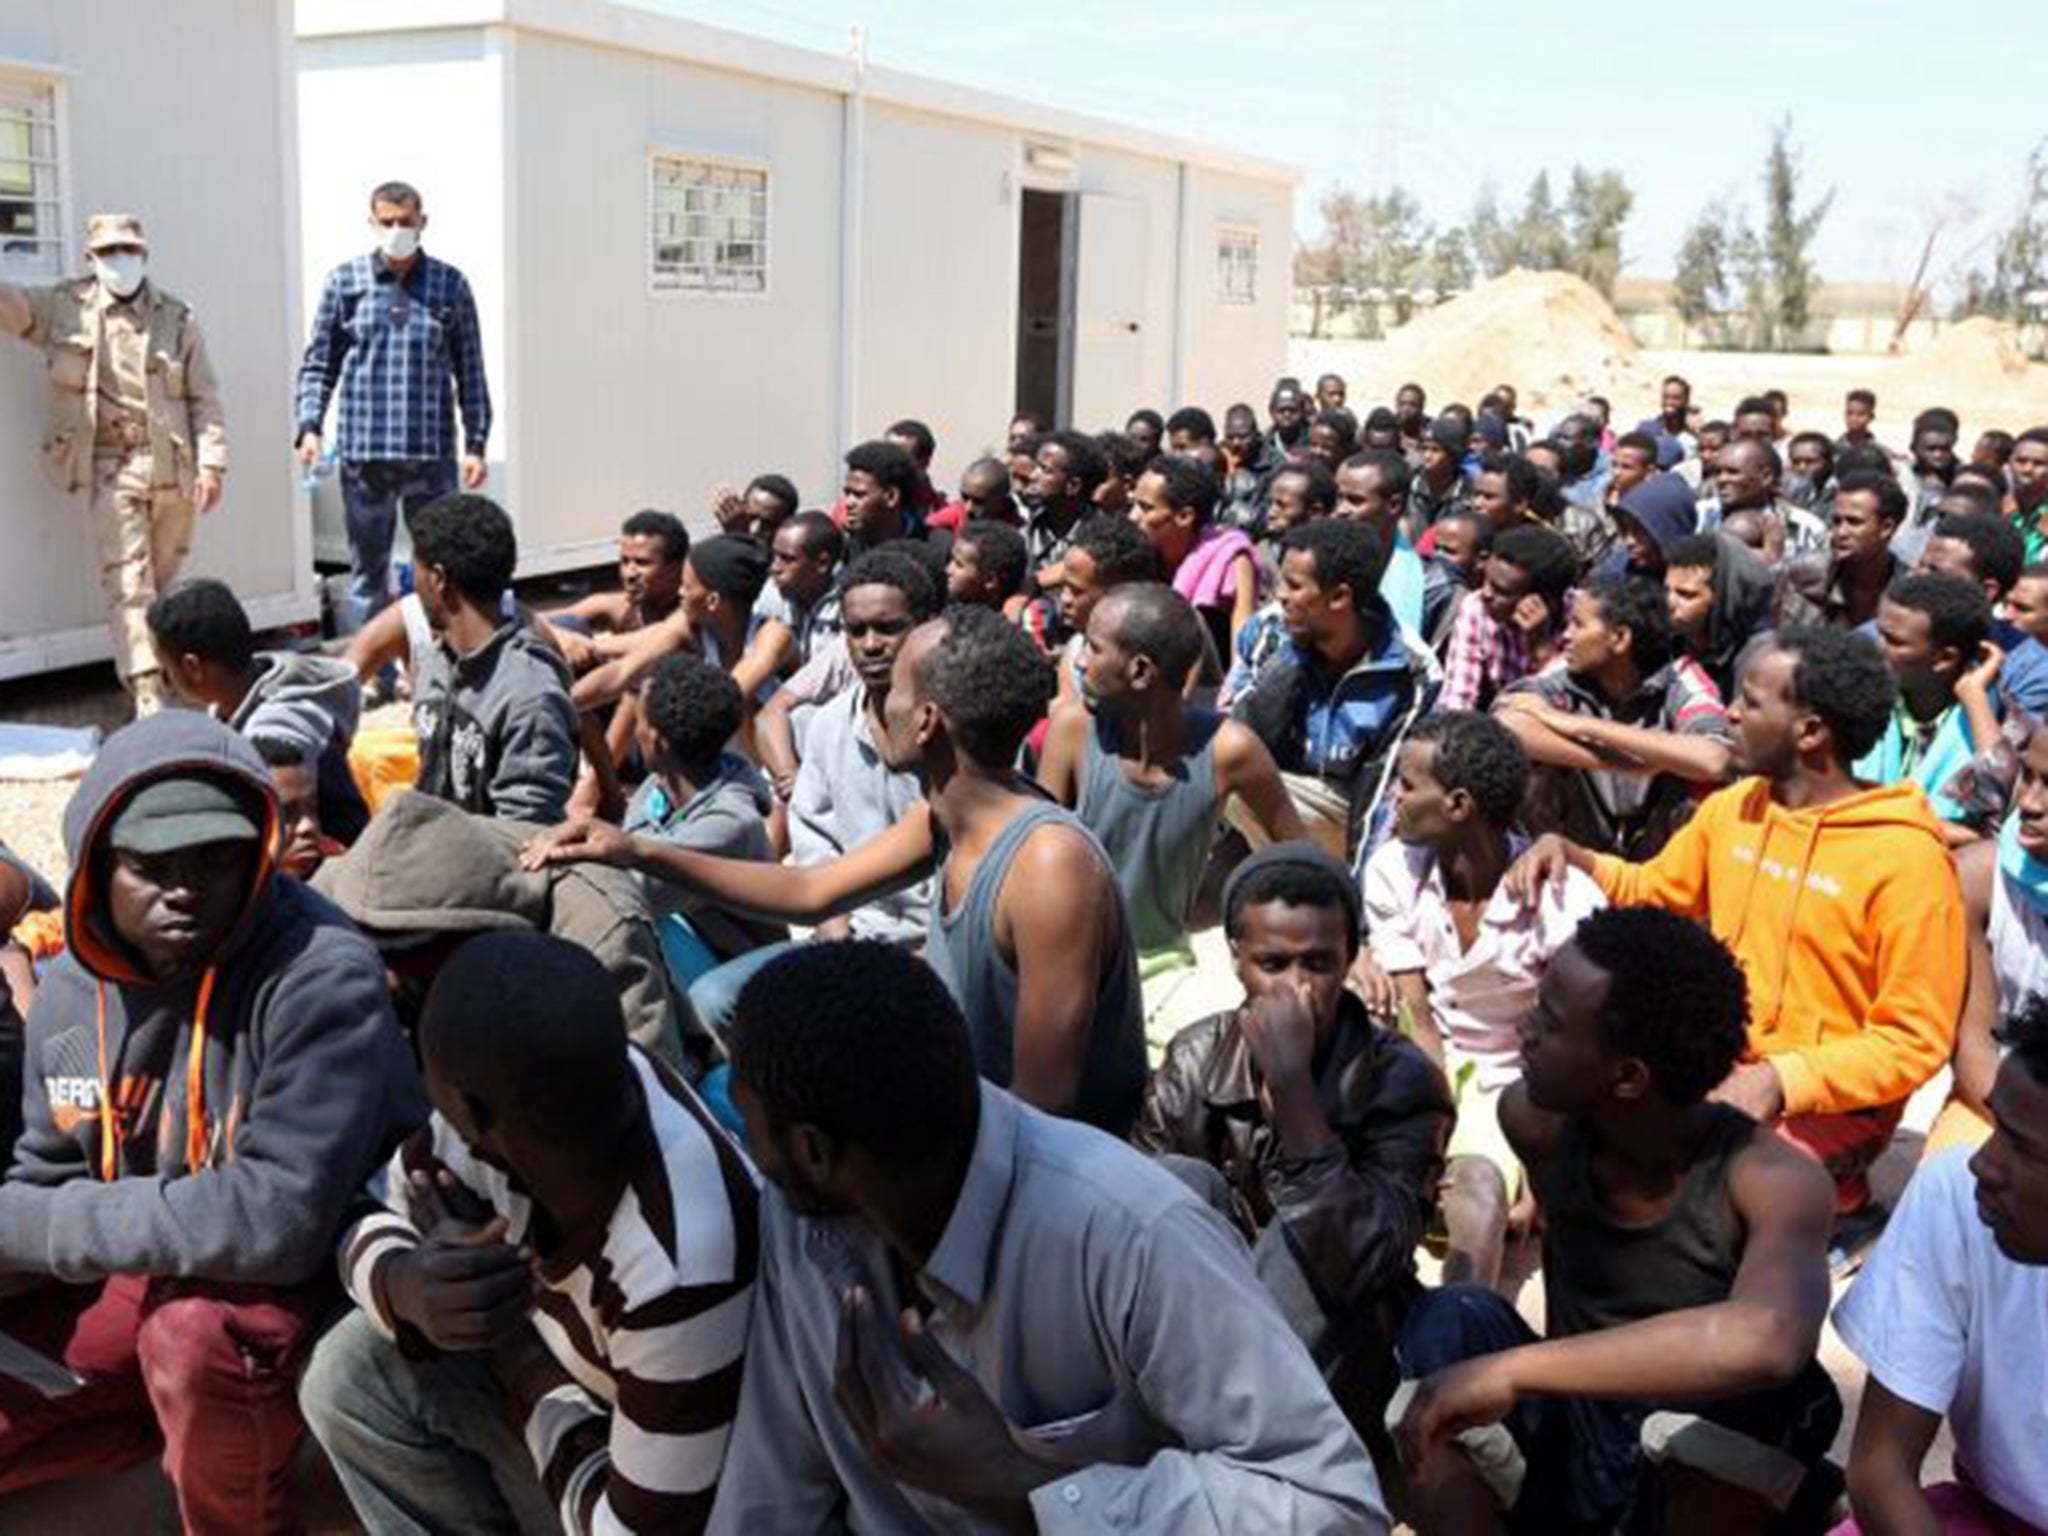 Migrants from sub-Saharan Africa sit at a centre for illegal migrants in Misrata on April 15 after their boat was intercepted by the Libyan coast guard